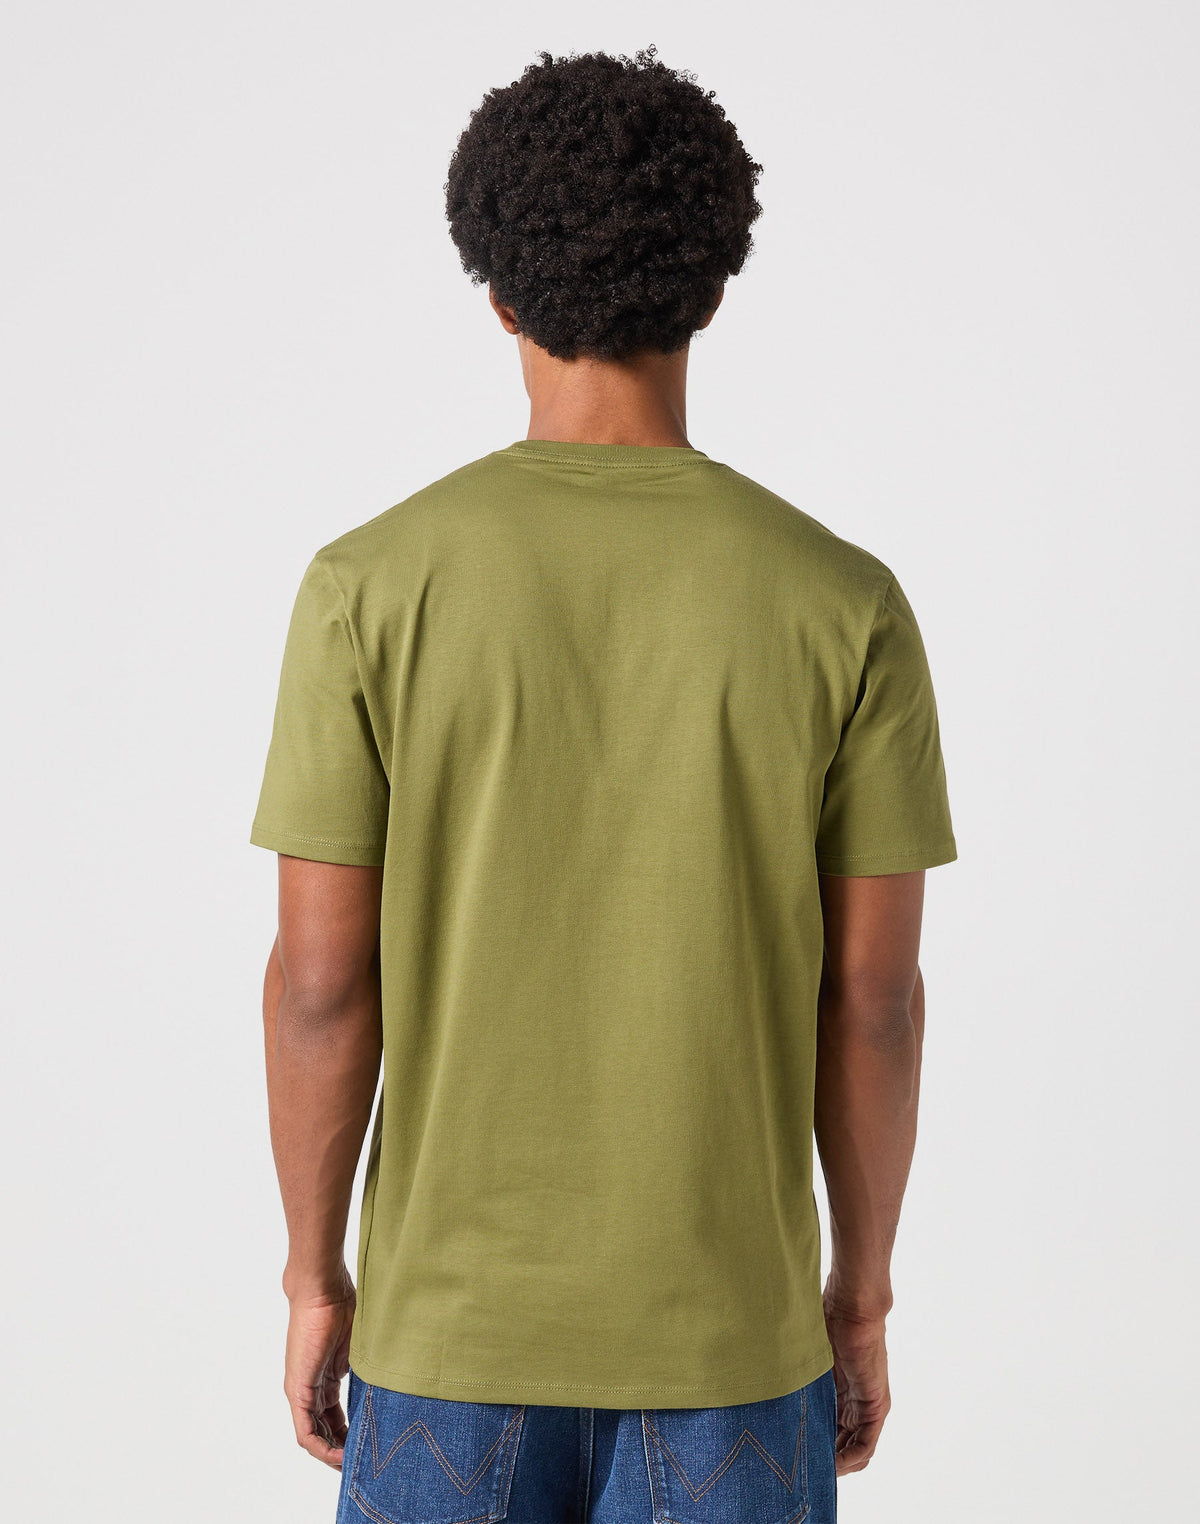 Sign Off Tee in Dusty Olive